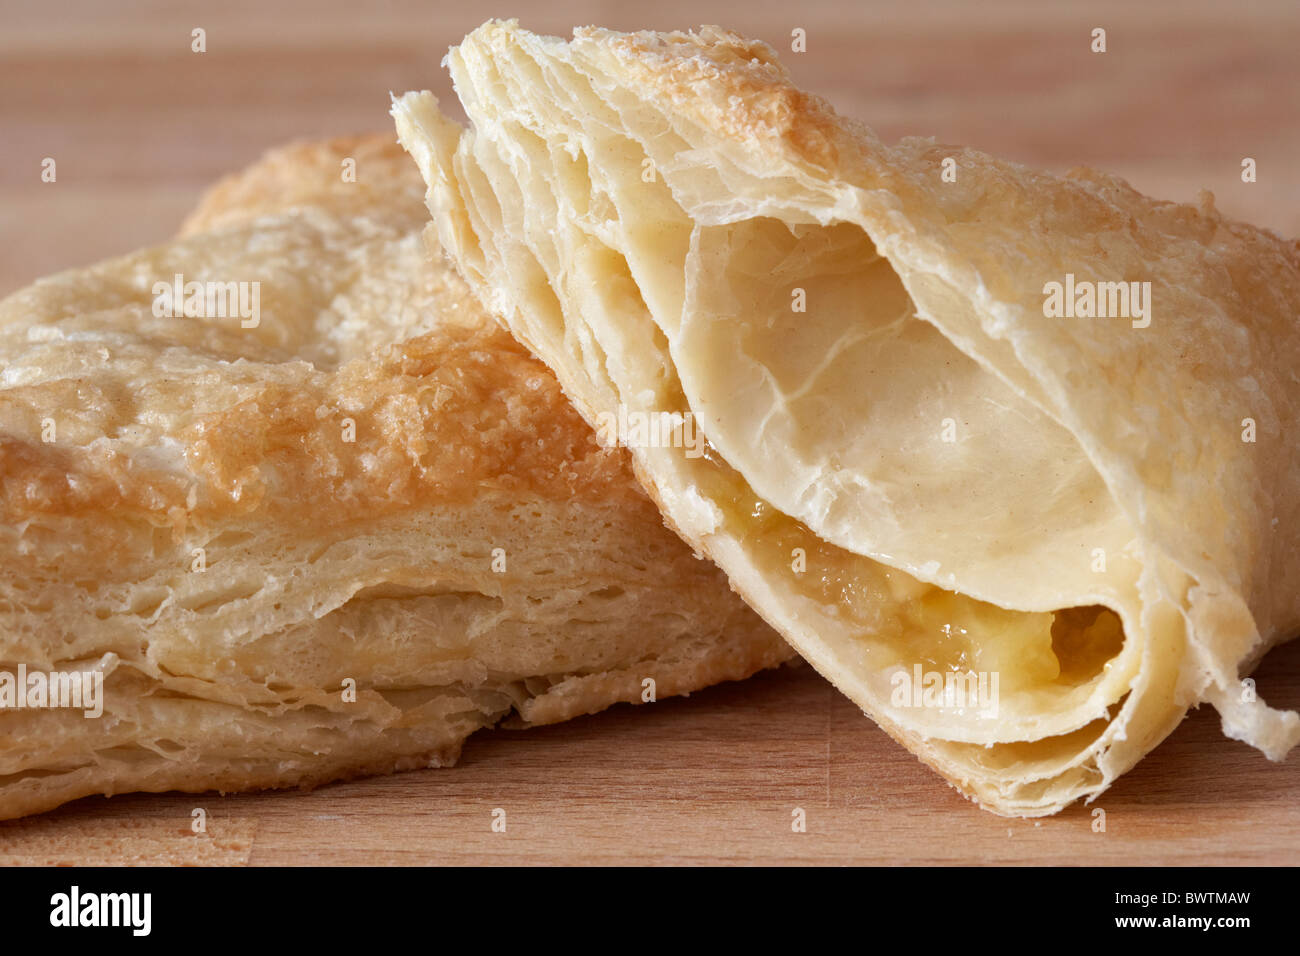 apple turnovers known as apple puffs in ireland Stock Photo